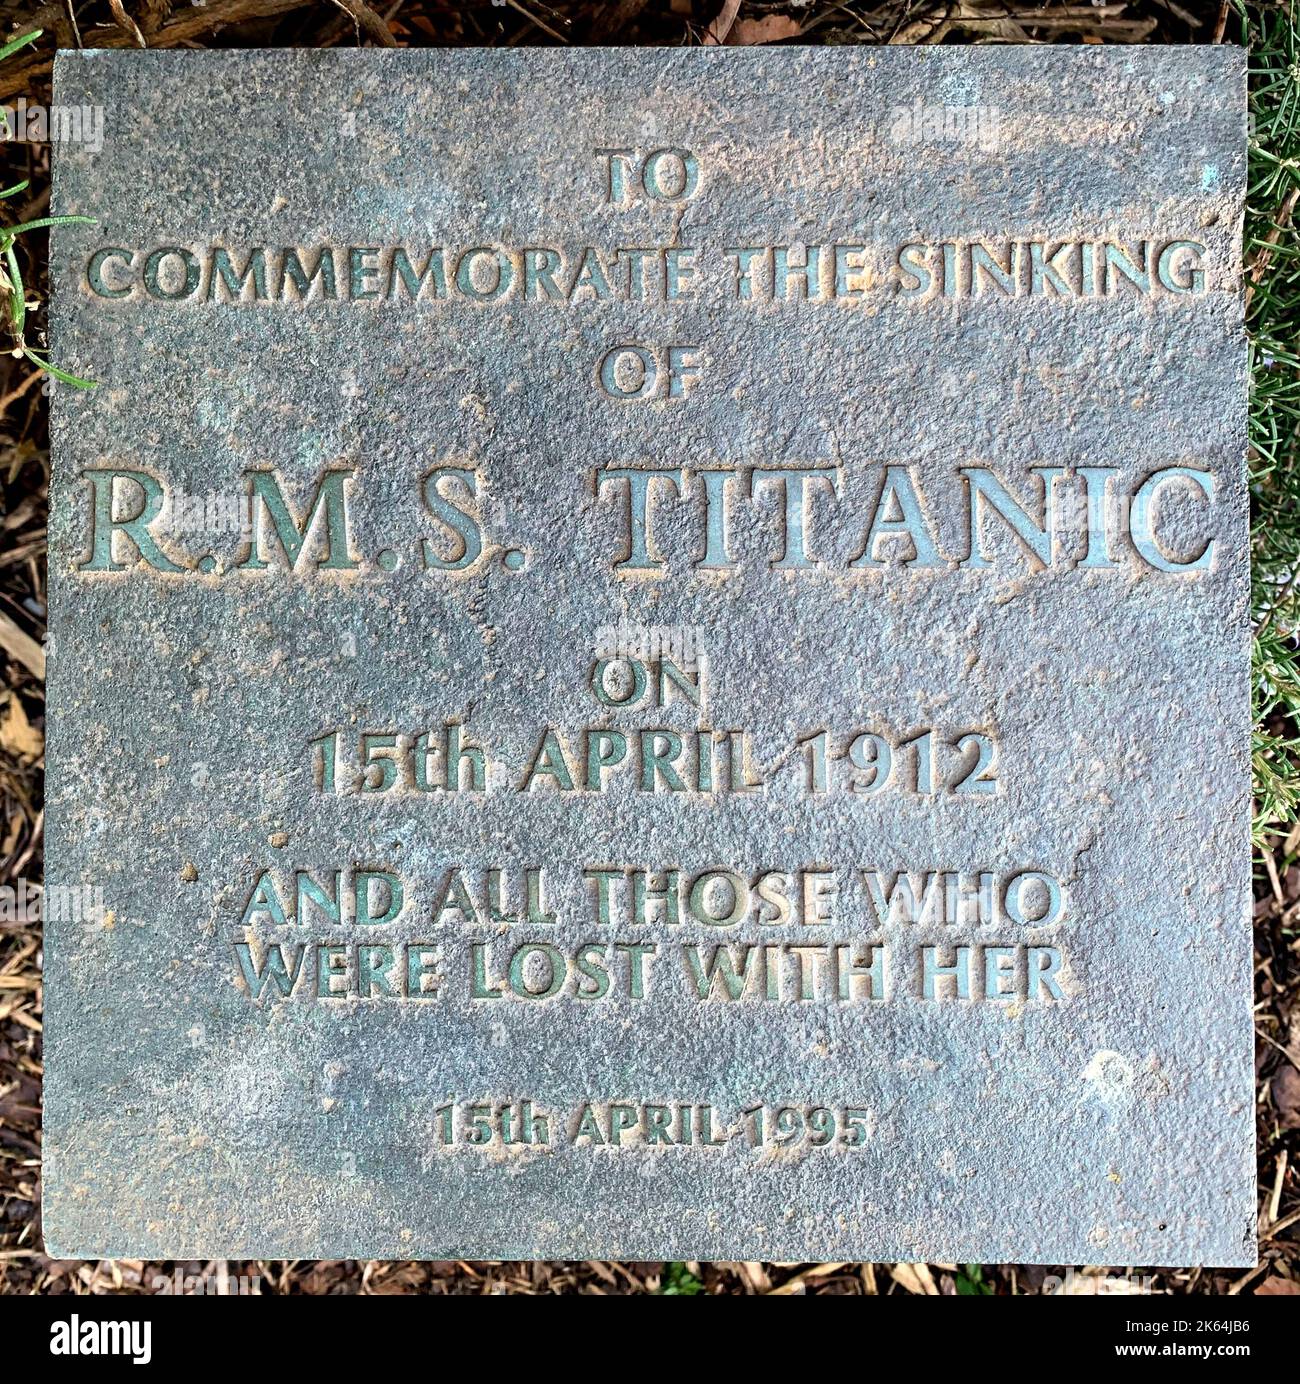 A simple brass plaque in the Titanic Memorial Garden at The National Maritime Museum, Greenwich, London. The gardens were opened in 1995 by 98-year old Titanic survivor Edith Haisman, who was fifteen years old at the time. Also present was survivor Eva Hart. Interviewed for the unveiling of the memorial, Edith Haisman recalled 'Most of the men jumped overboard into the sea. Those who could swim swam and those who could not sank. There was no hope for anyone'. Speaking about the garden, Edith said to reporters that it was a 'beautiful' tribute to the victims of the Titanic.     Date: 2022 Stock Photo